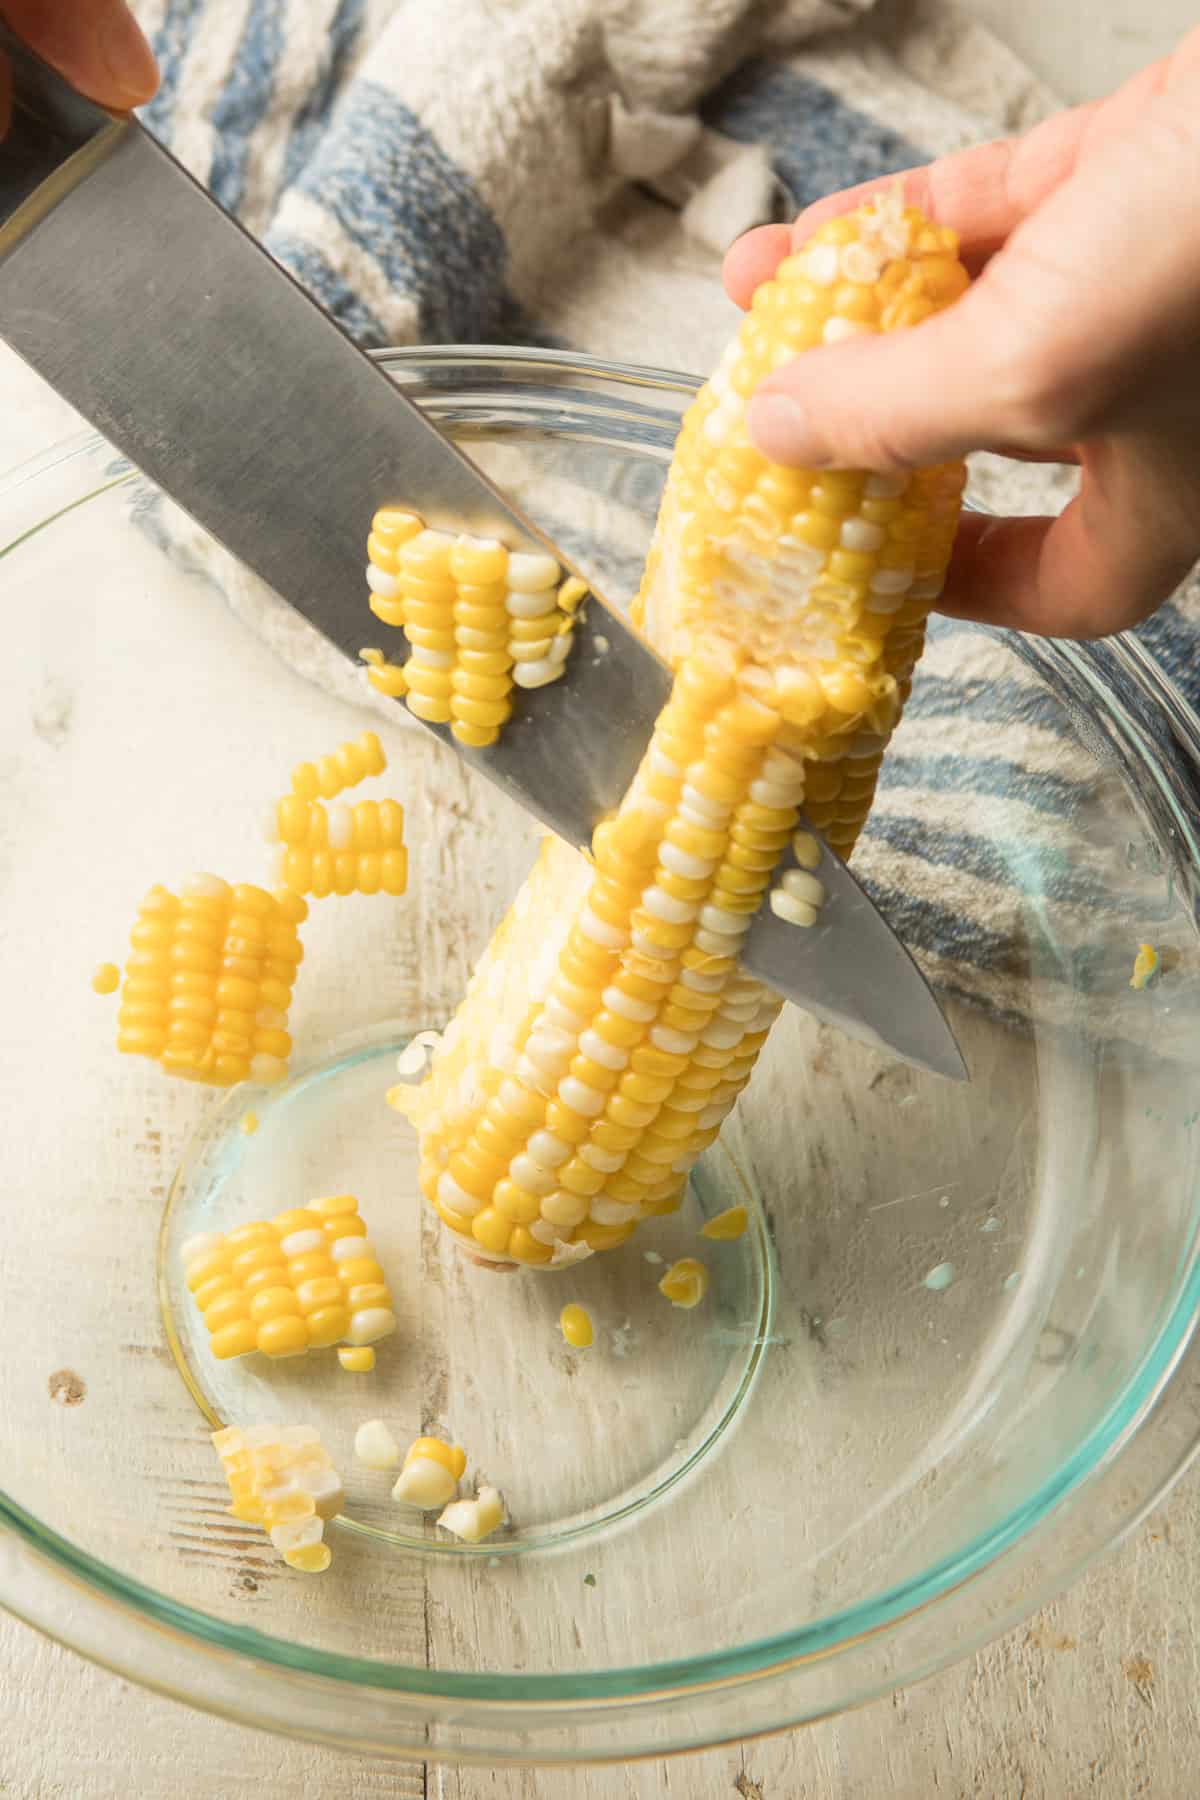 Hand Cutting Corn From a Cob into a Bowl